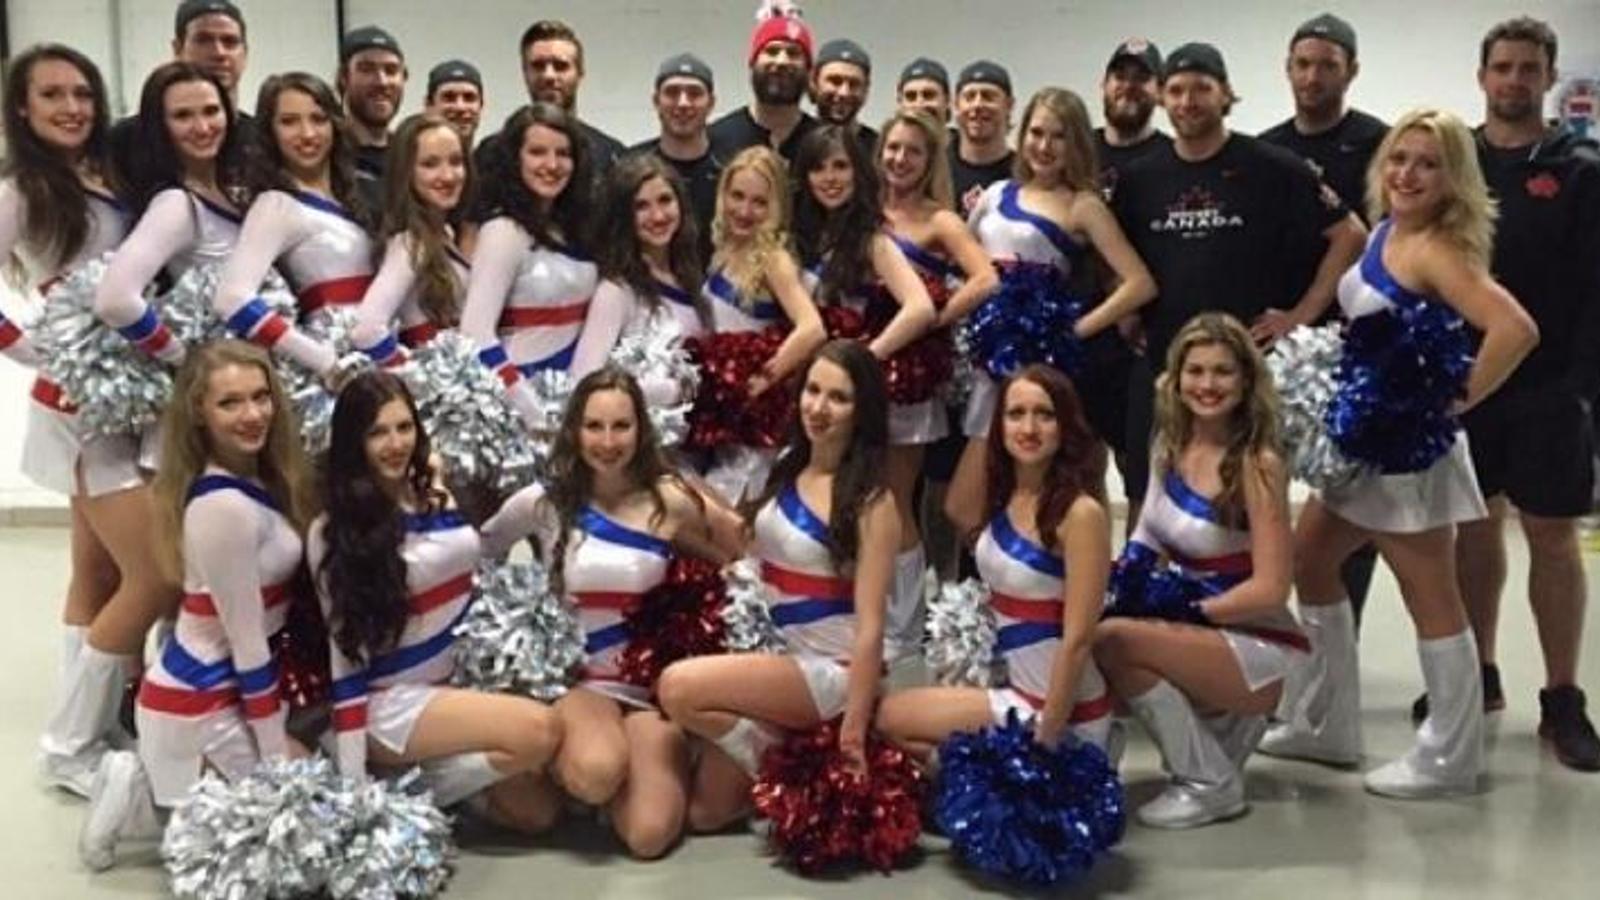 (Photos): Claude Giroux looks right at home surrounded by beautiful ladies.